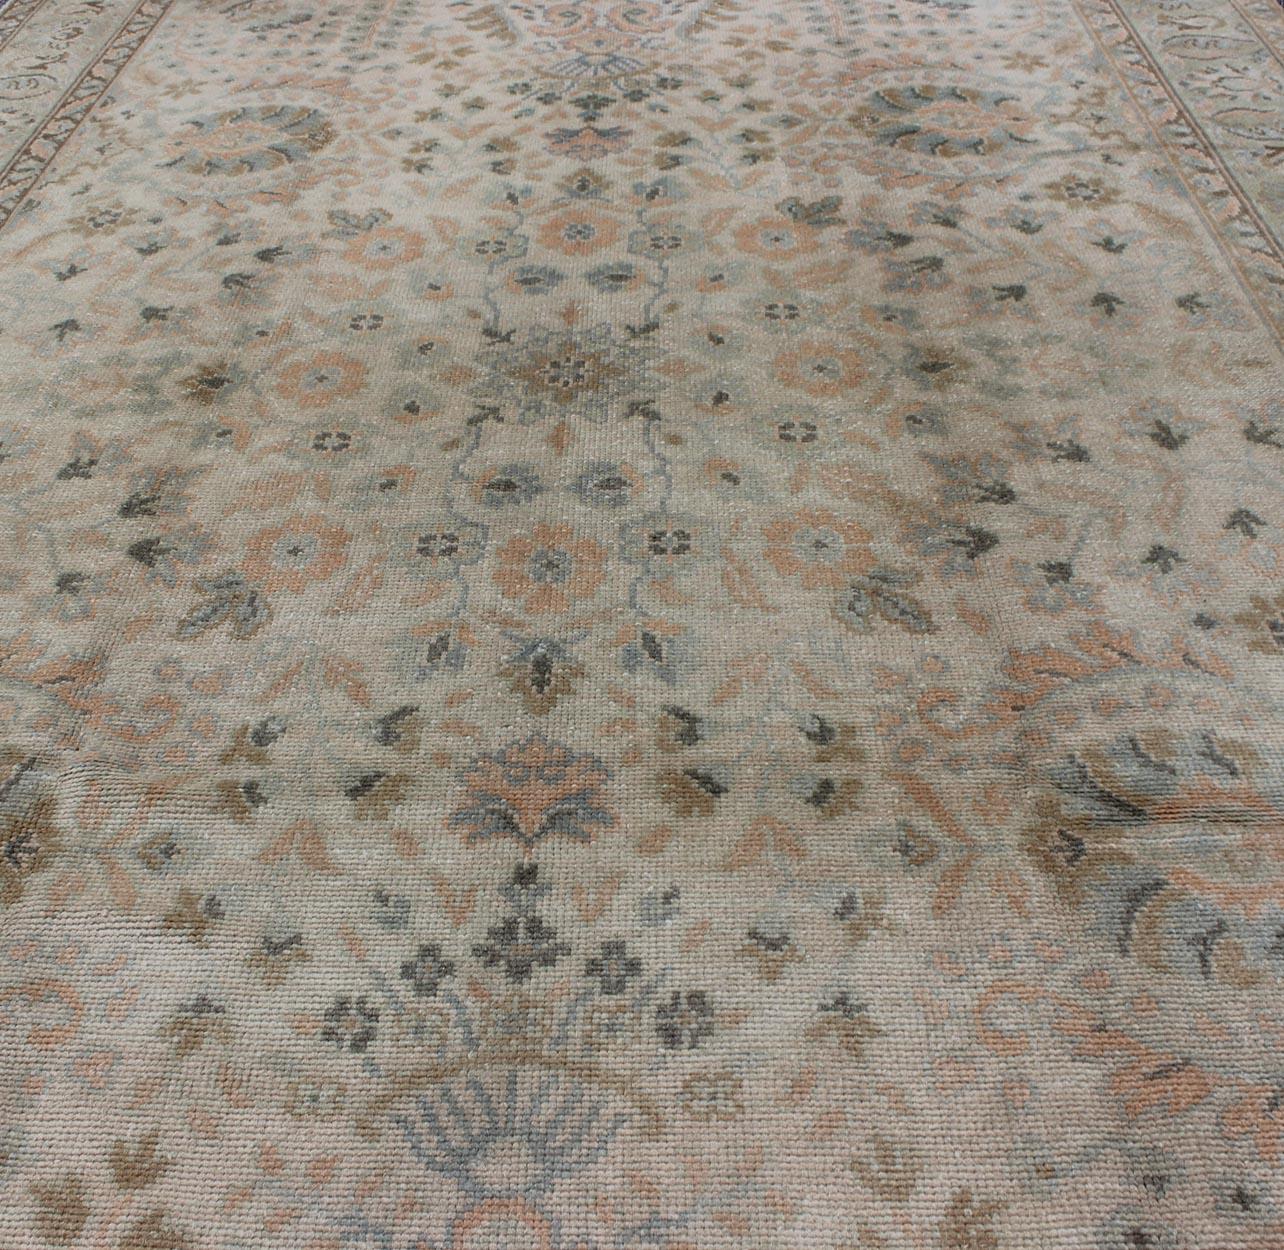 Wool Neutral Vintage Turkish Oushak Rug with Floral Design and Repeated Floral Motifs For Sale